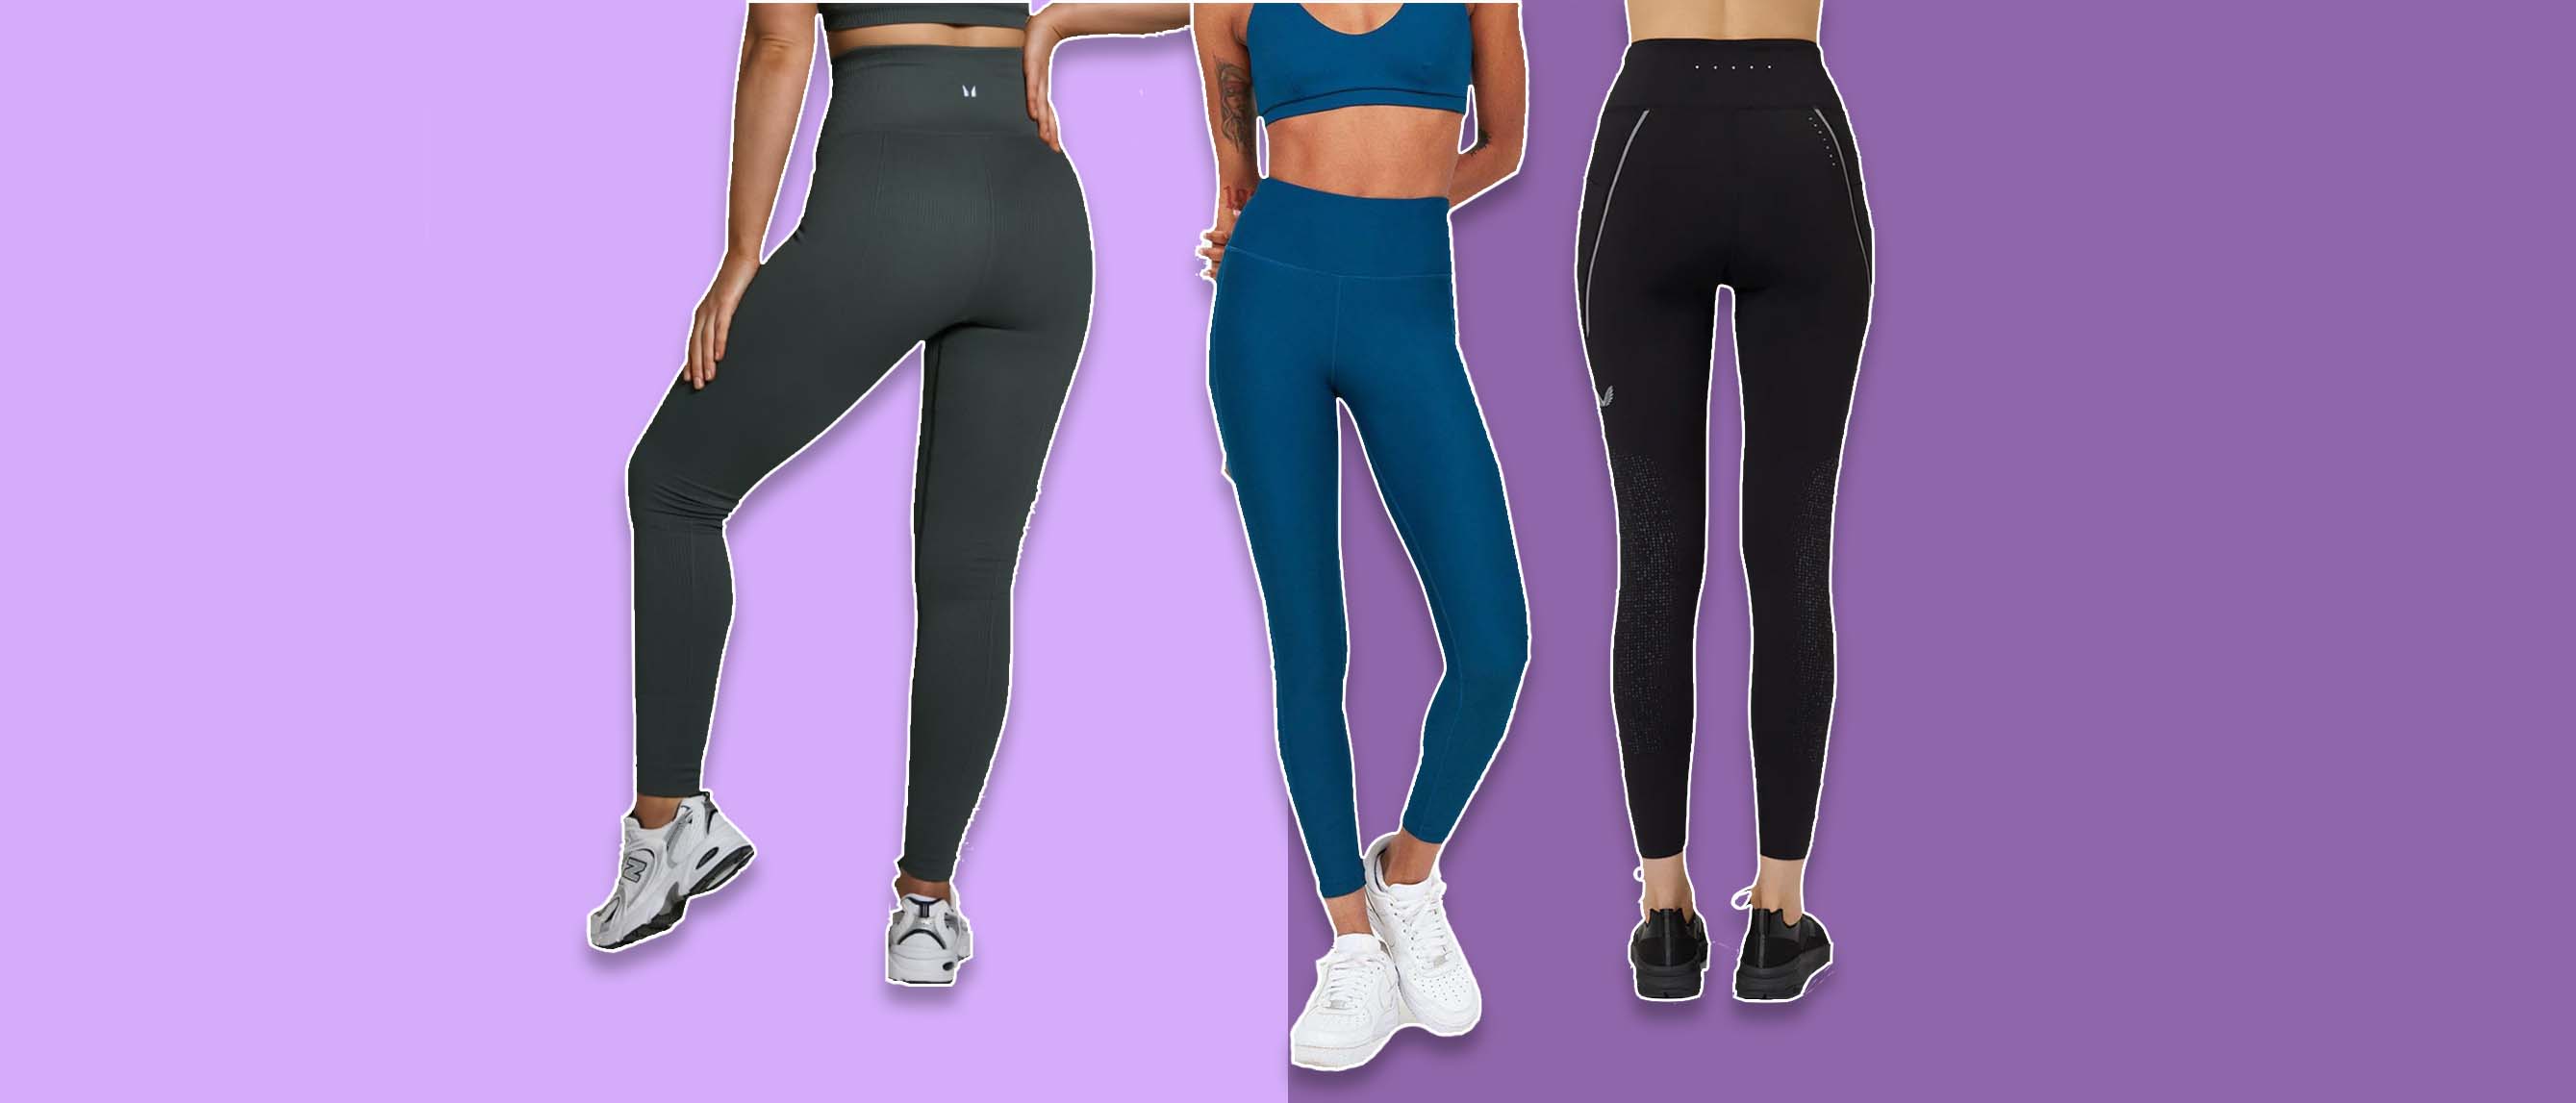 How To Keep Leggings From Falling Down